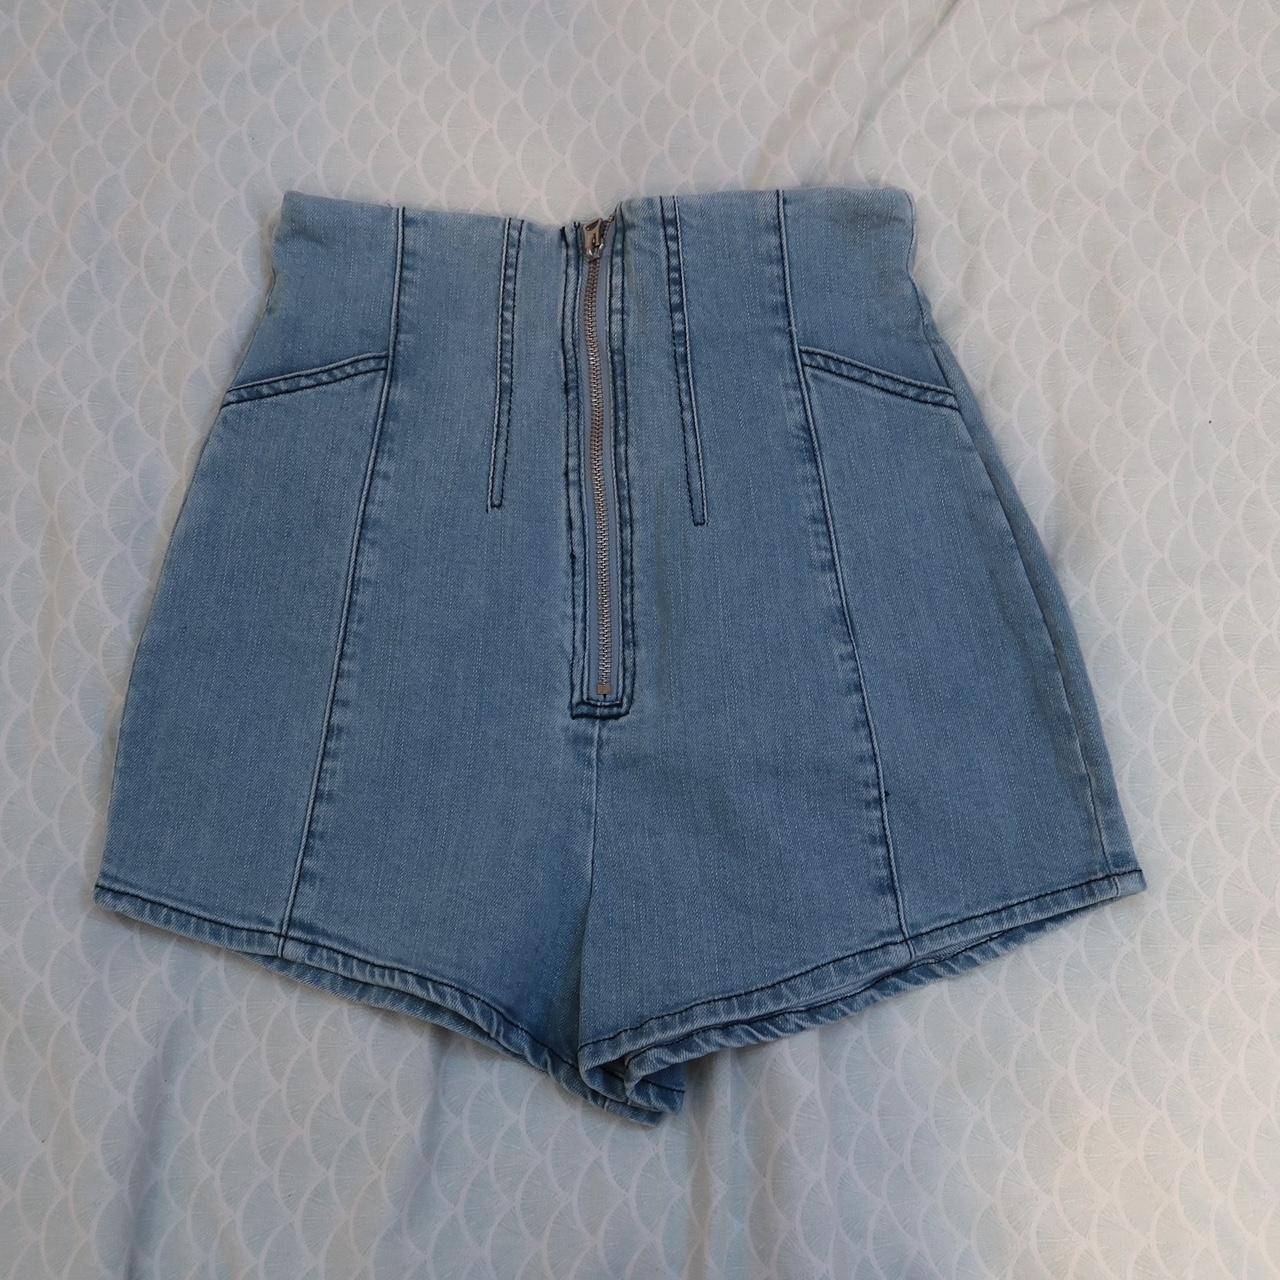 Finders Keepers Women's Blue Shorts